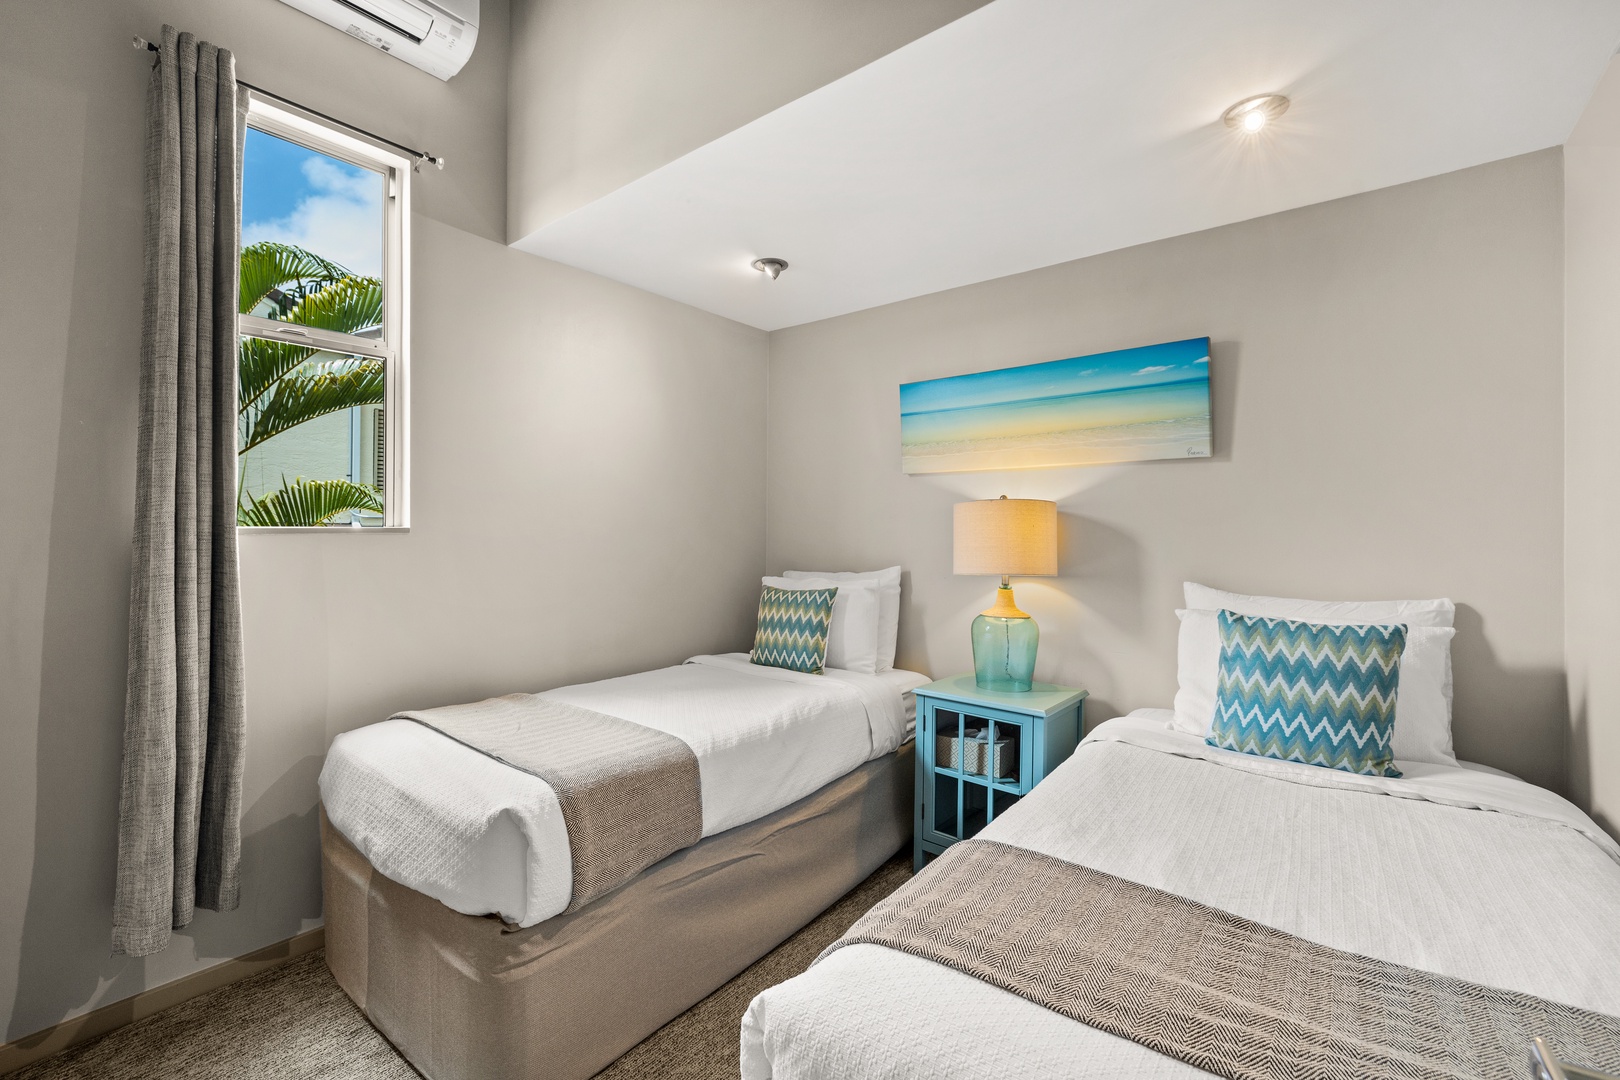 Honolulu Vacation Rentals, Villa Luana - Bedroom three, which shares a bath with bedroom two. (Beds can be converted to a king with prior request.)